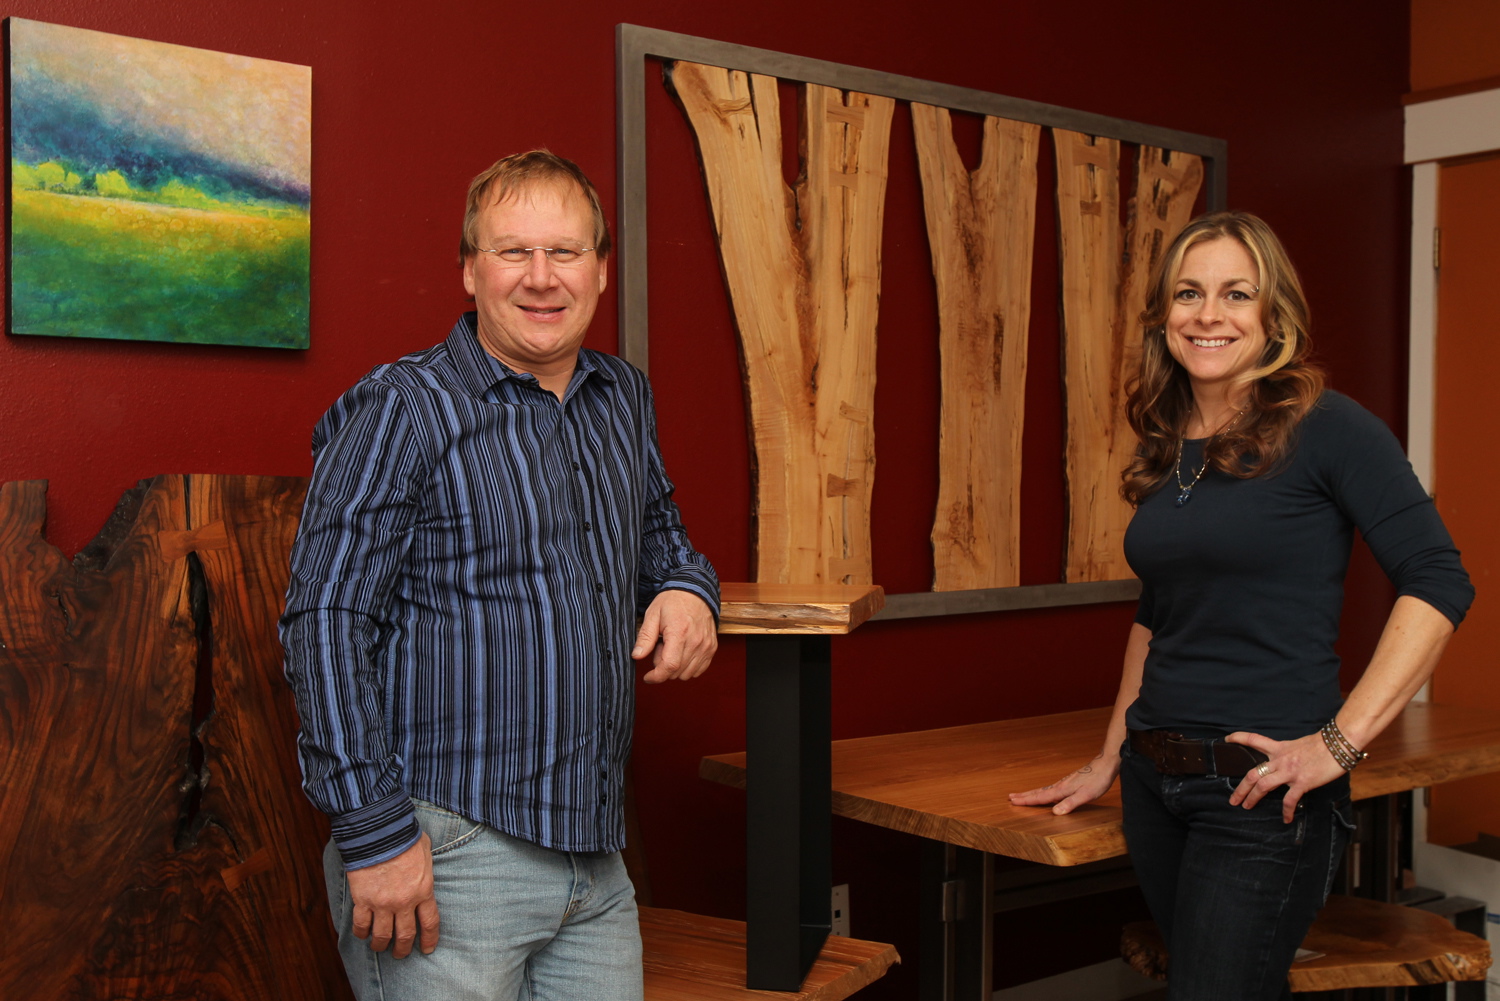 Mike Ross, owner of Natural Edge Furniture, and his sales manager, Renee Van Matre, pose at the company's showroom Feb. 11 in downtown Bend, Ore.